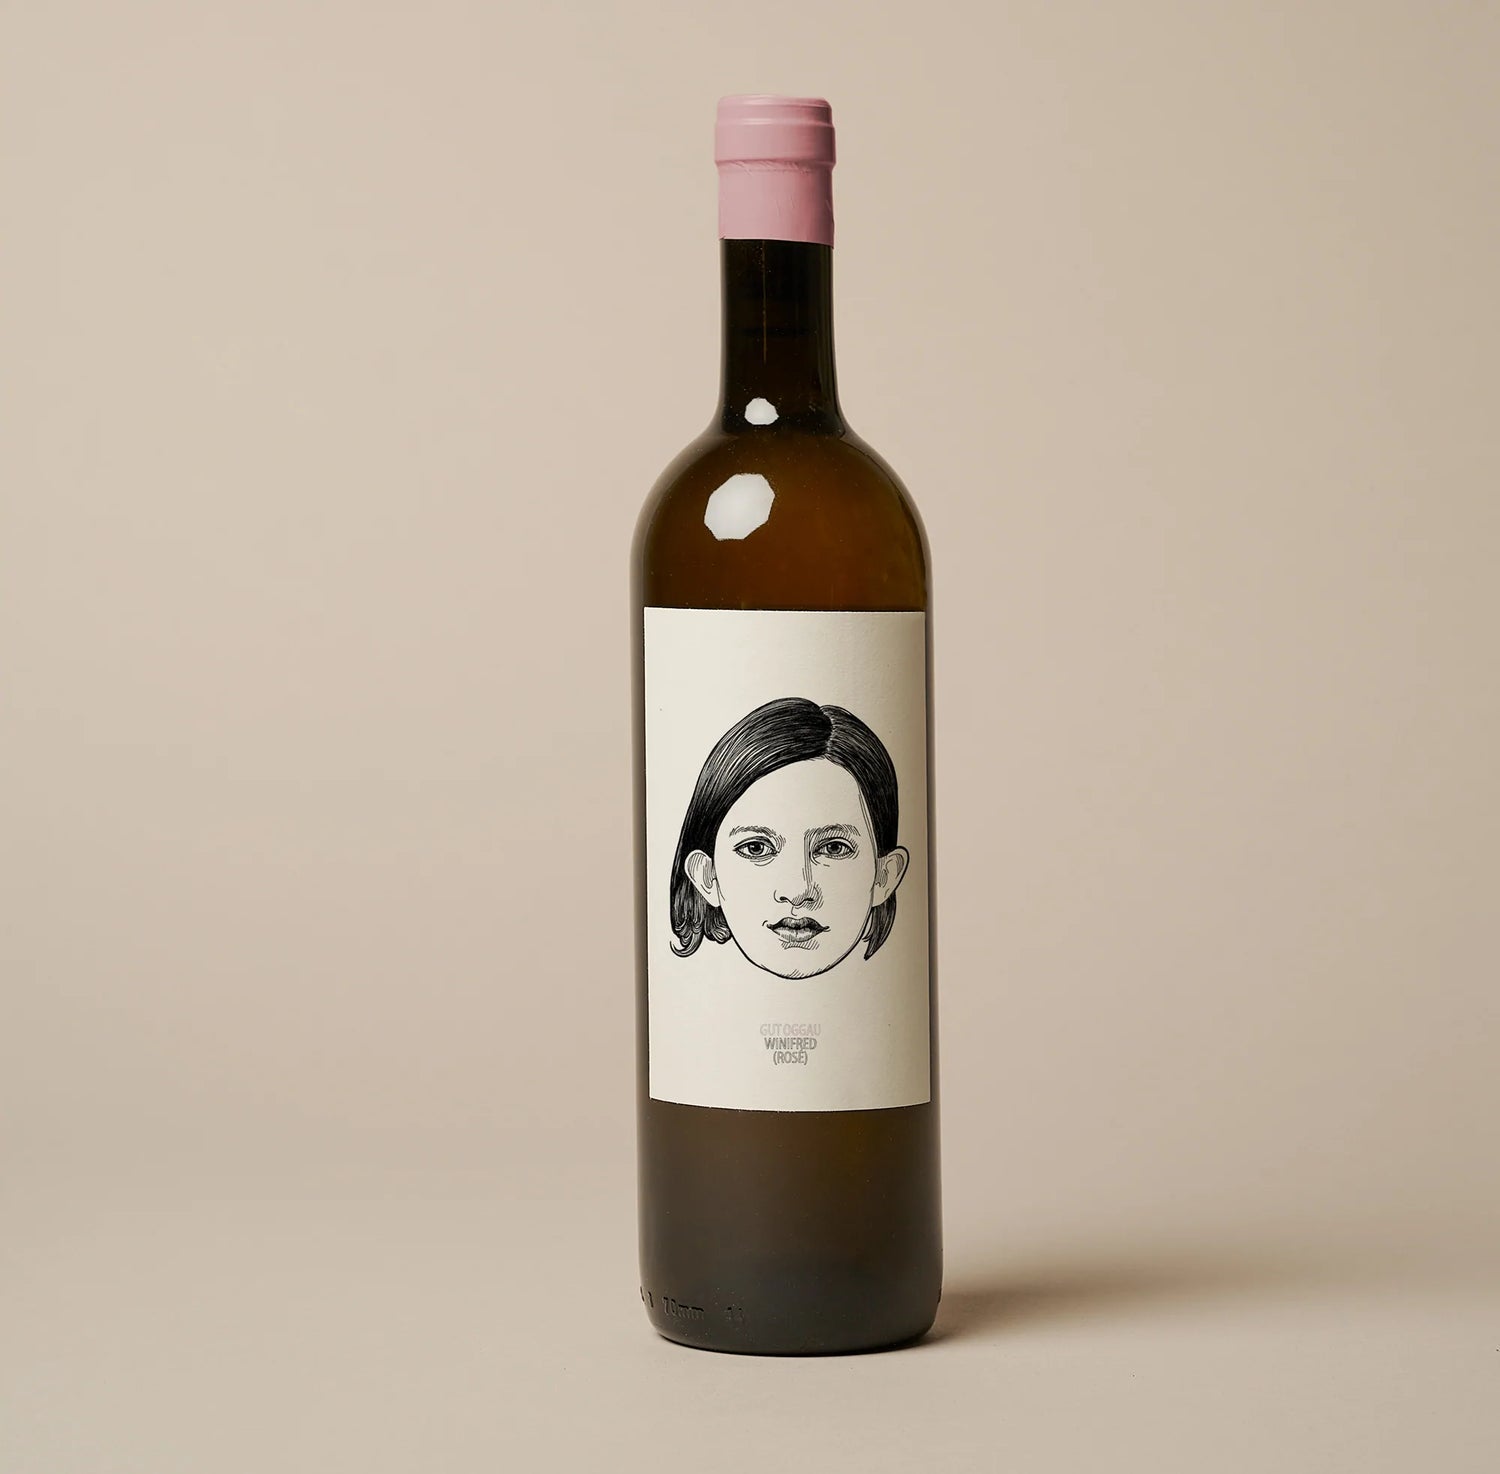 wine bottle with a female face on label